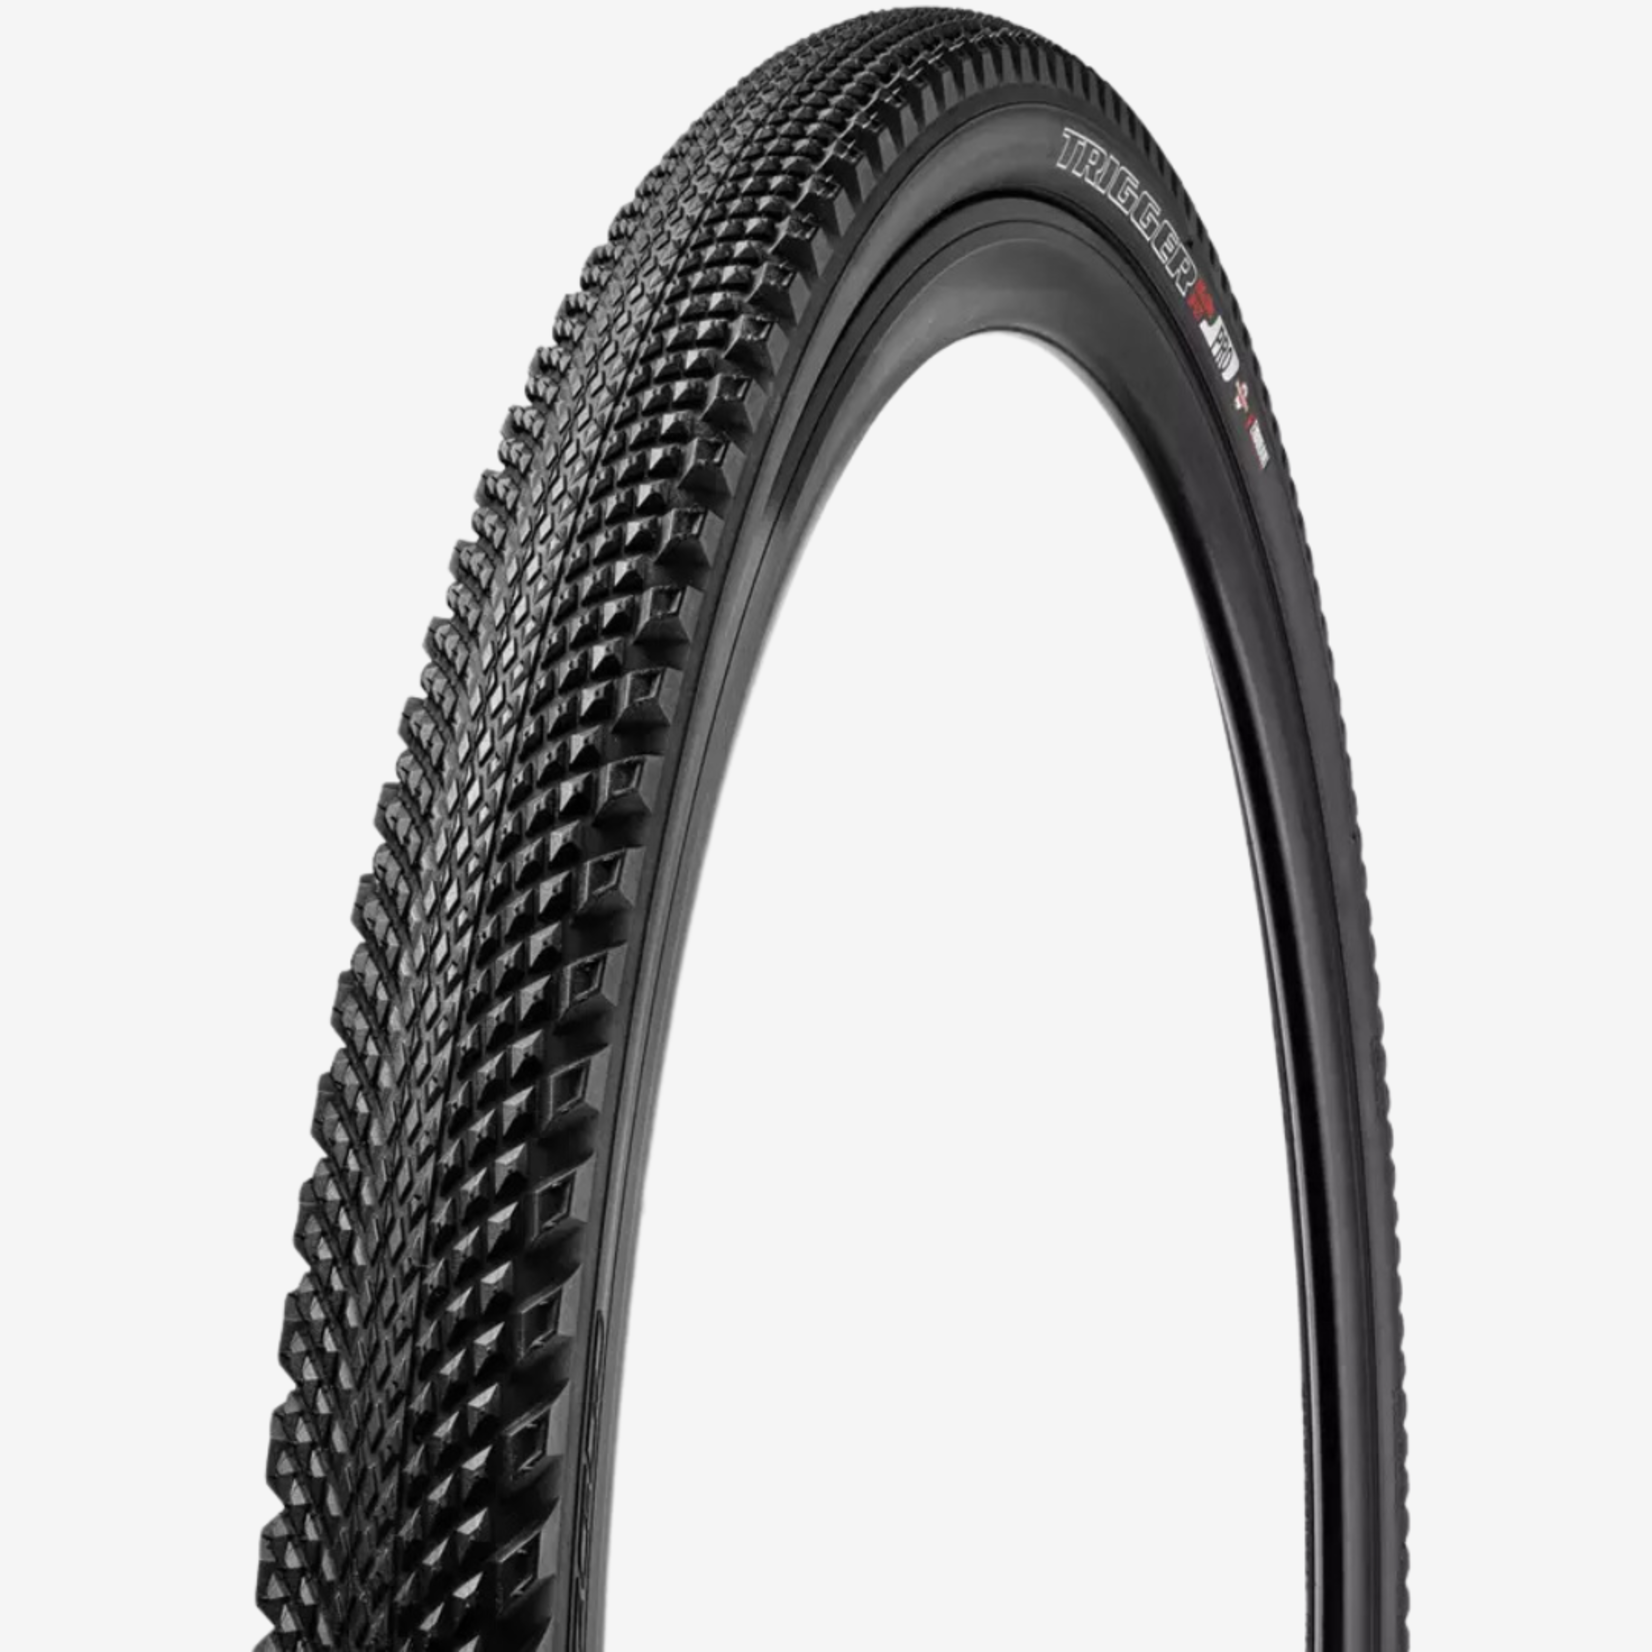 SPECIALIZED TRIGGER PRO 2BLISS READY GRAVEL TIRE 700X38